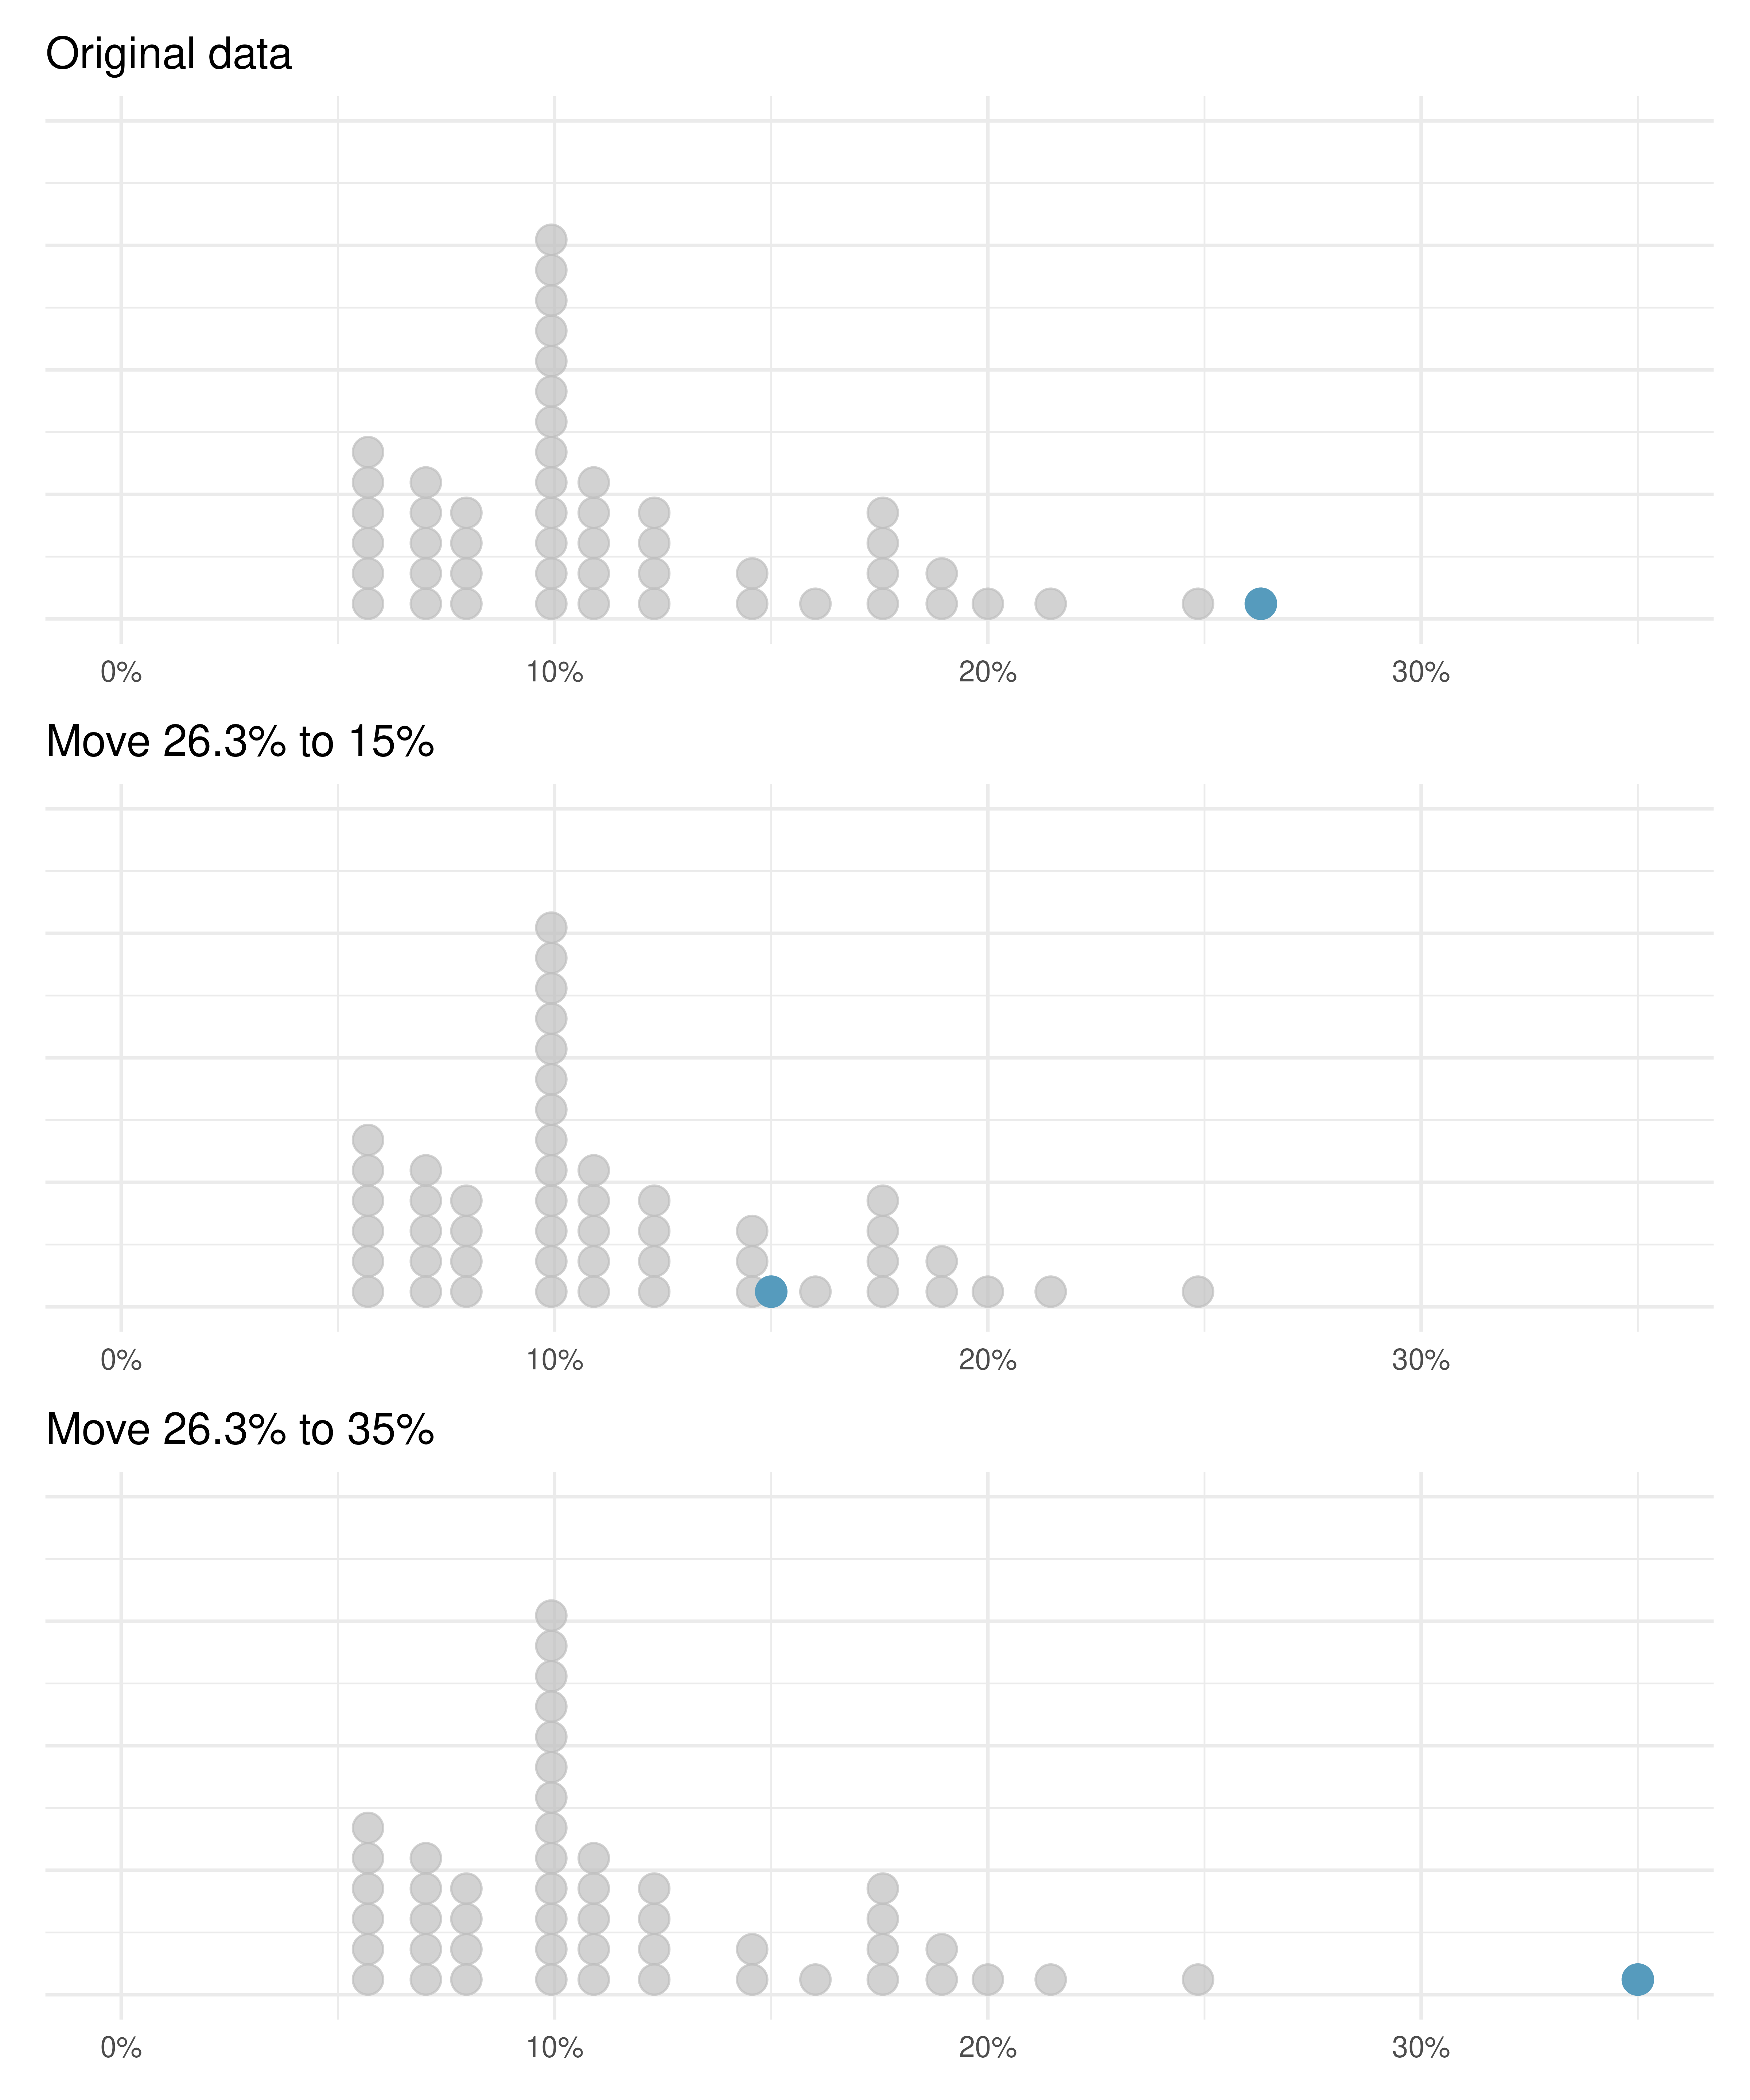 Dot plots of the original interest rate data and two modified datasets.